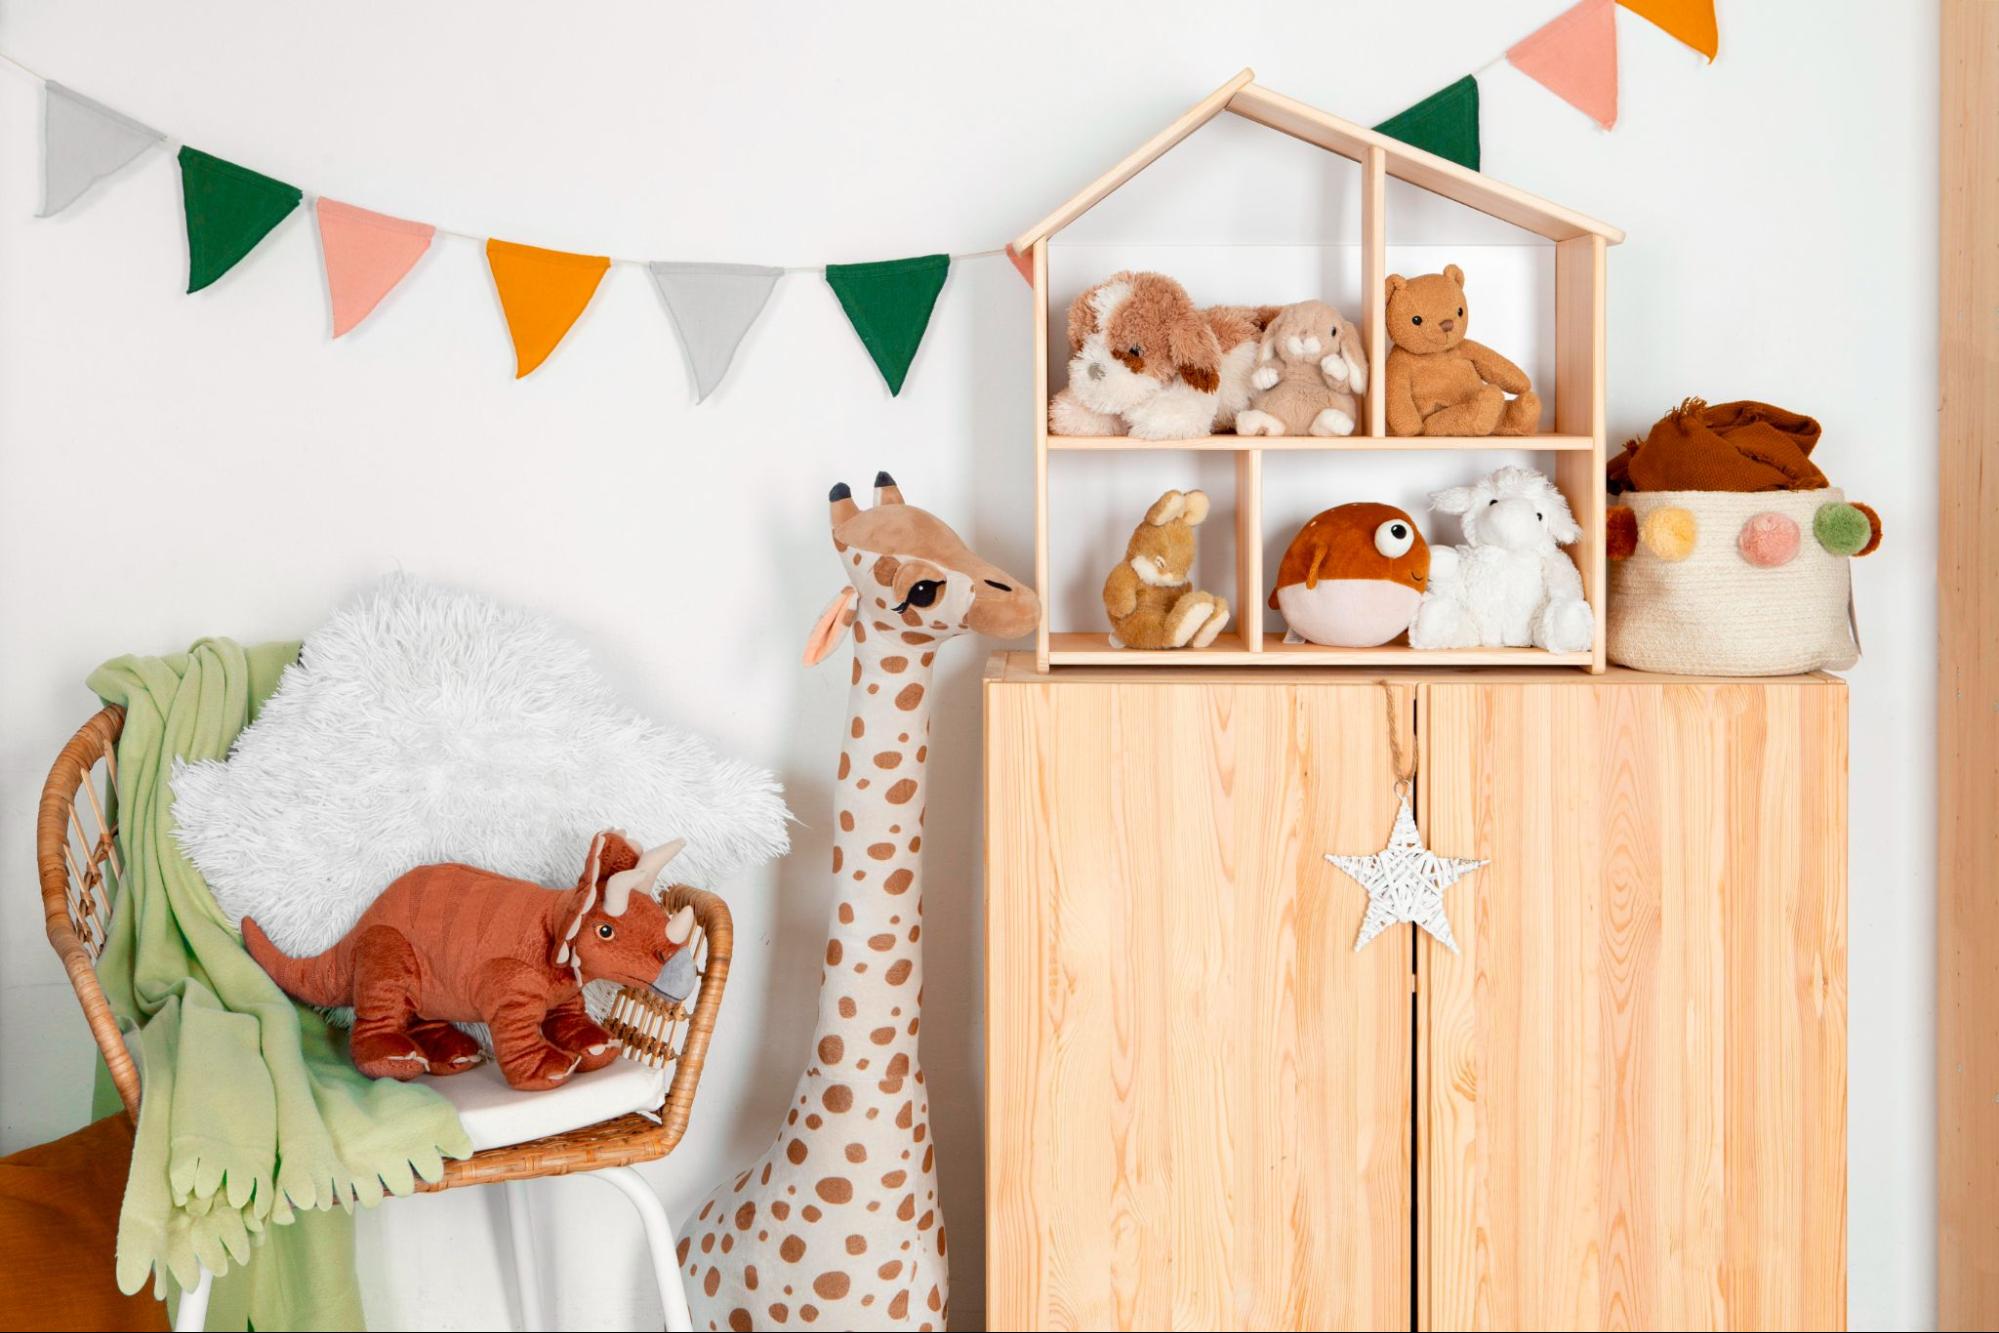 Nursery with plush toys and festive garland, a charming baby shower gift idea.